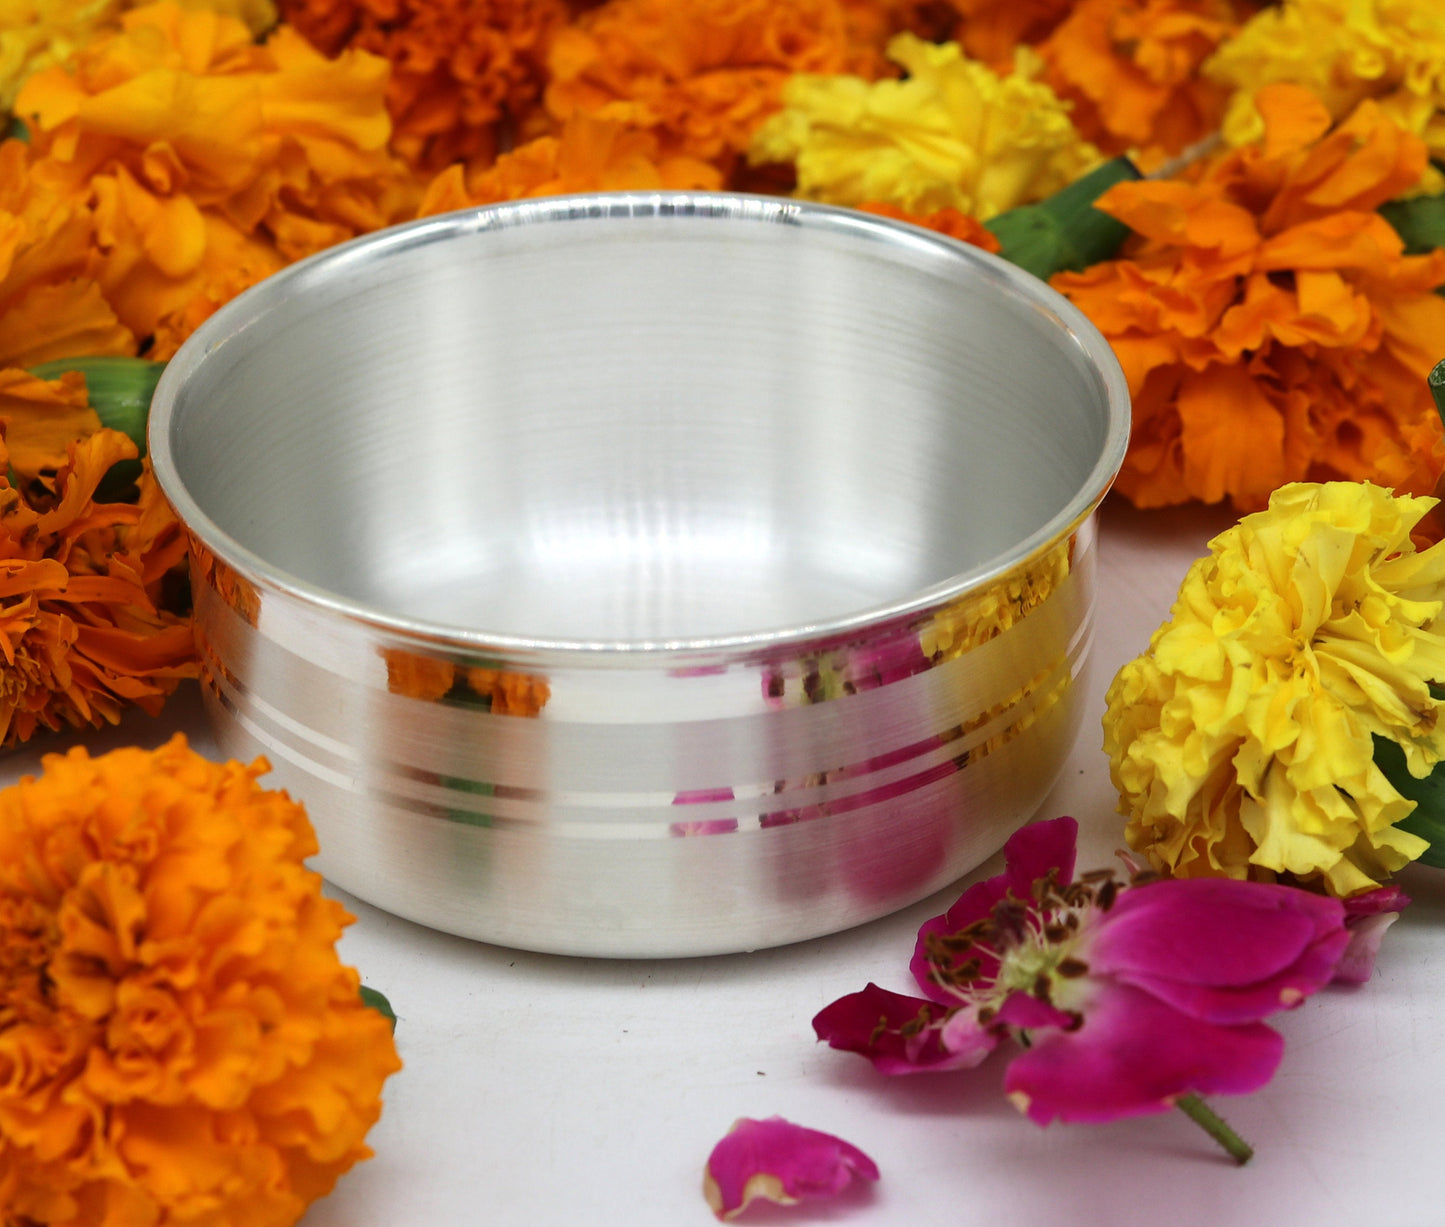 8cm wide 999 pure sterling silver handmade solid silver bowl, silver has antibacterial properties, keep stay healthy, silver vessels sv50 - TRIBAL ORNAMENTS